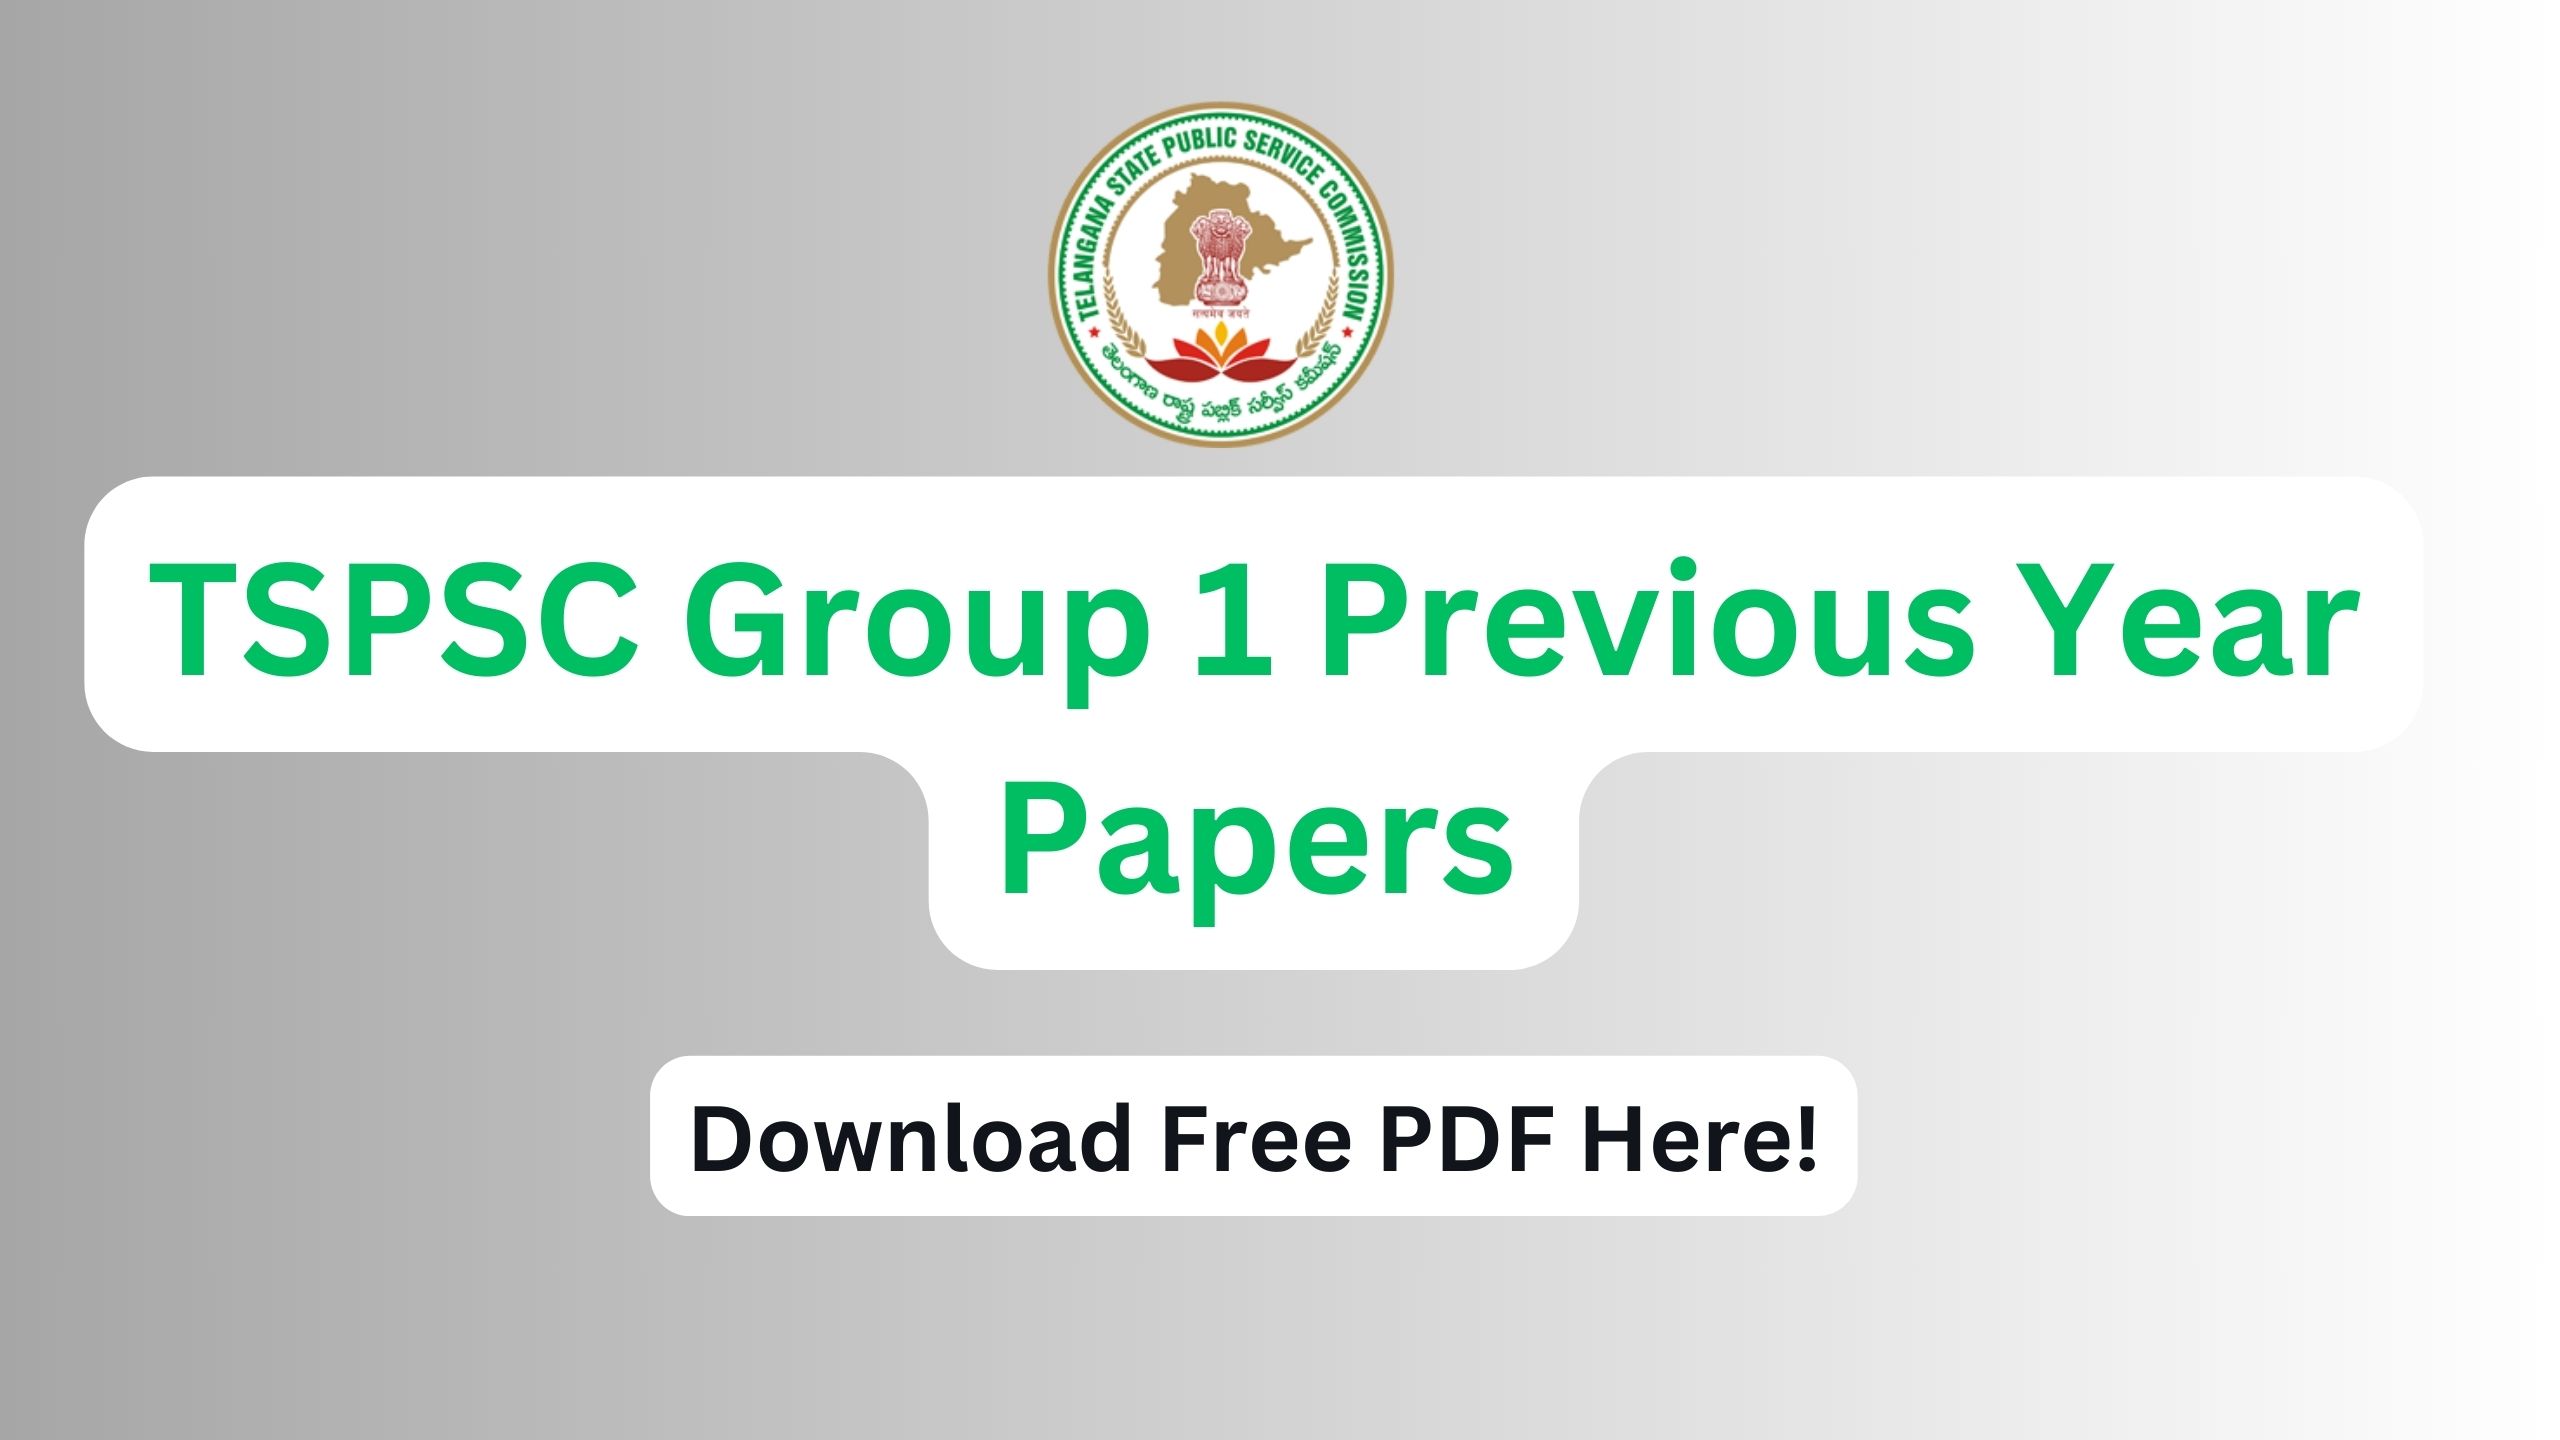 TSPSC Group 1 Previous Year Papers